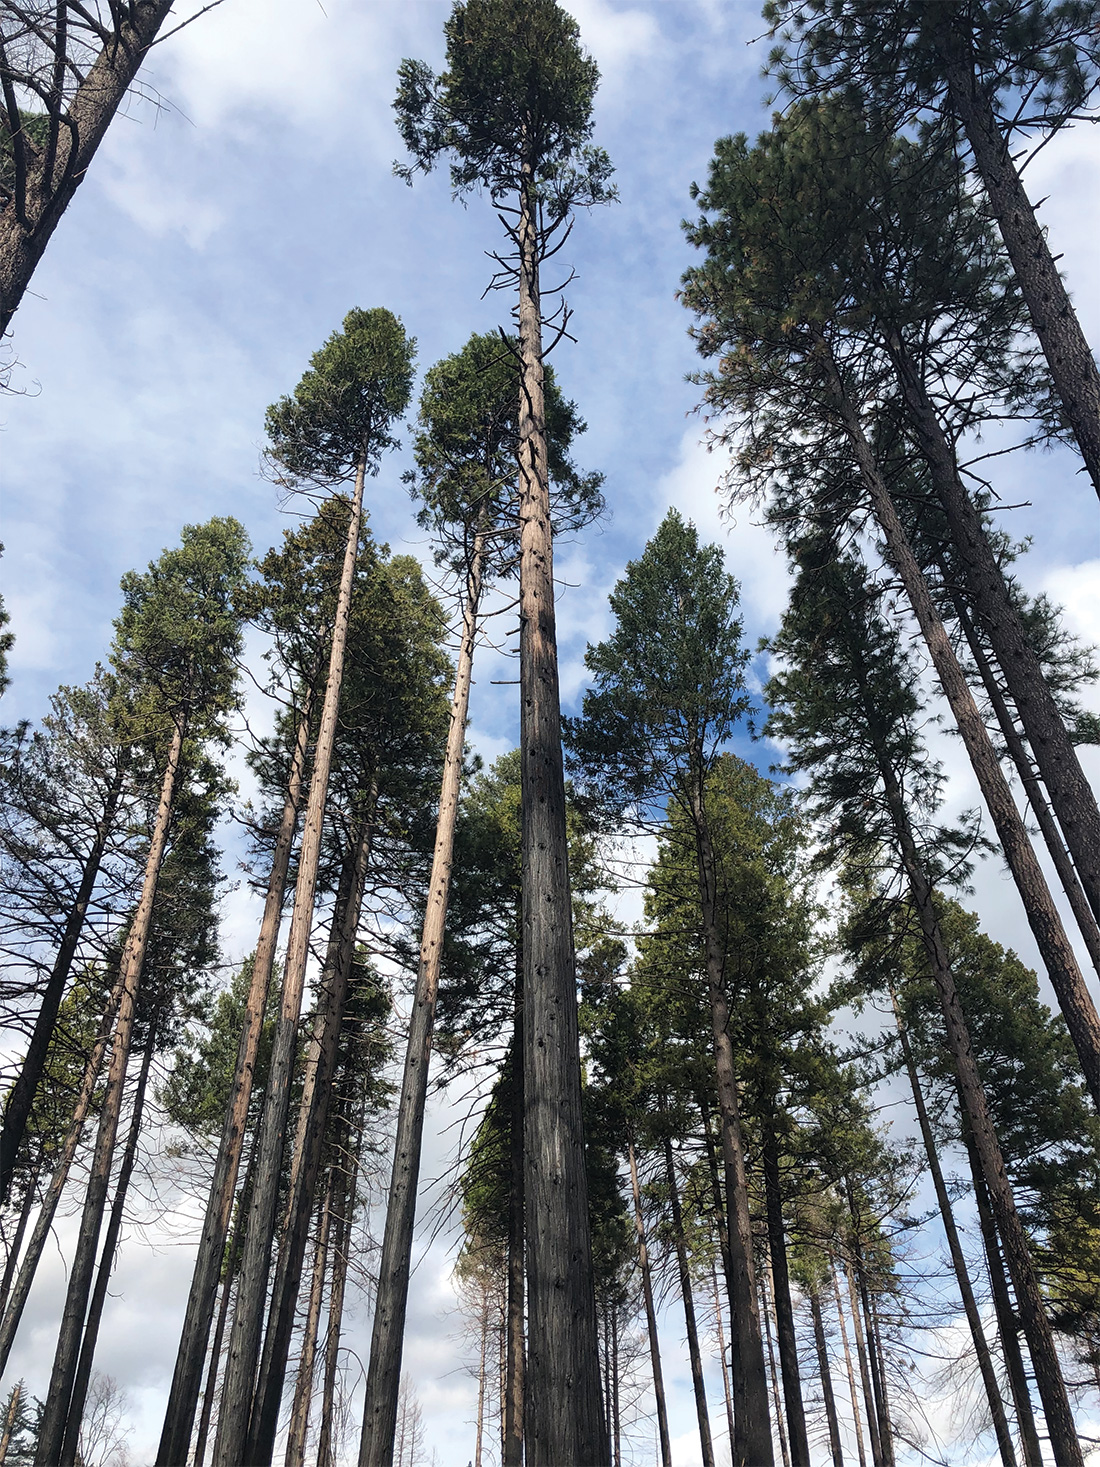 These incense cedars survived the Camp Fire. They grew up together and developed the tall lollipop shape because they were racing each other to reach sunlight. Having all their needles at the top, with bare trunks most of the way down, likely helped them survive the fire.